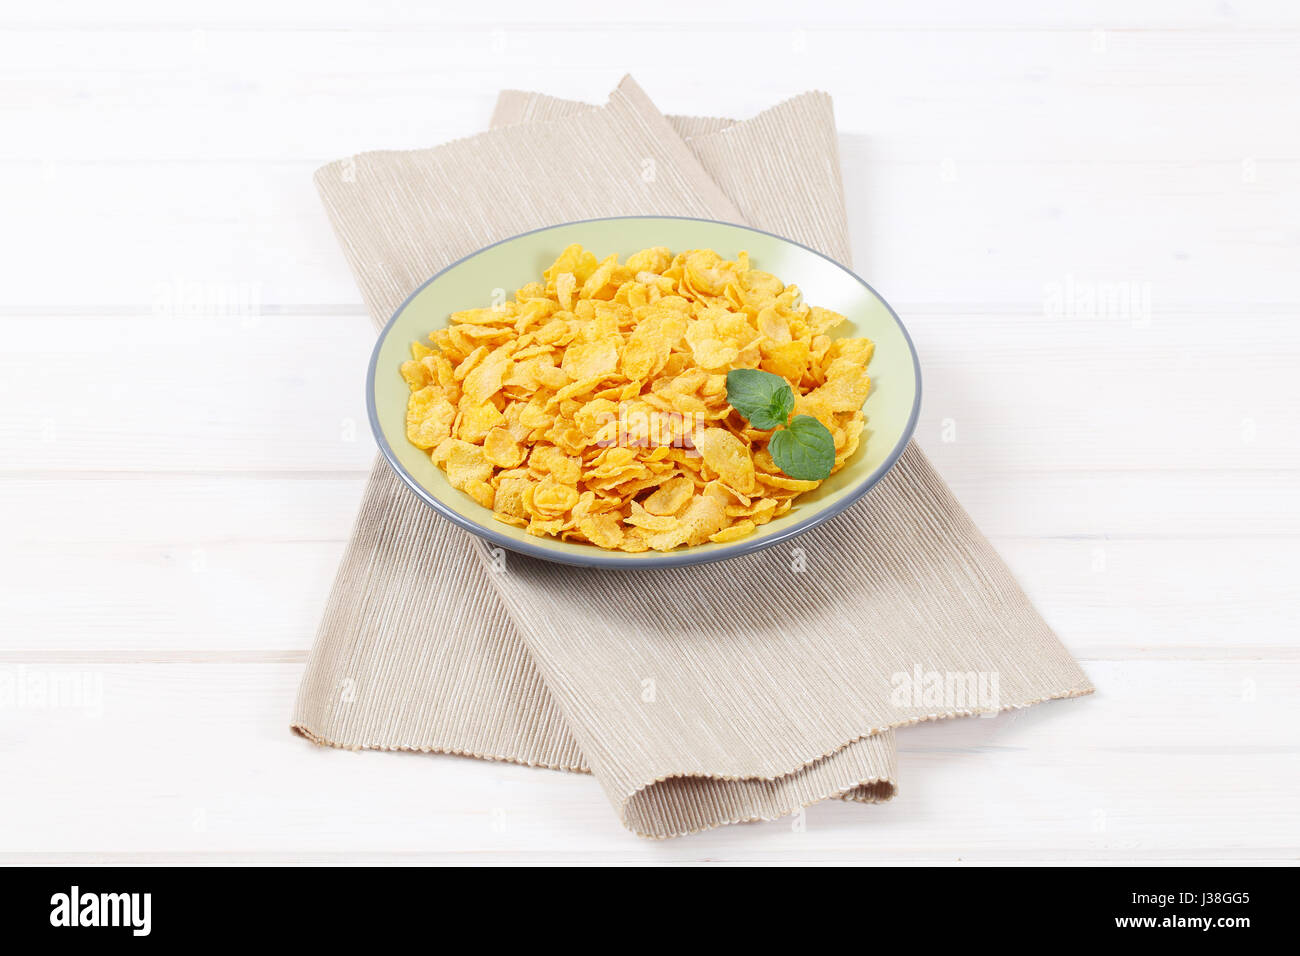 plate of corn flakes on beige place mat Stock Photo